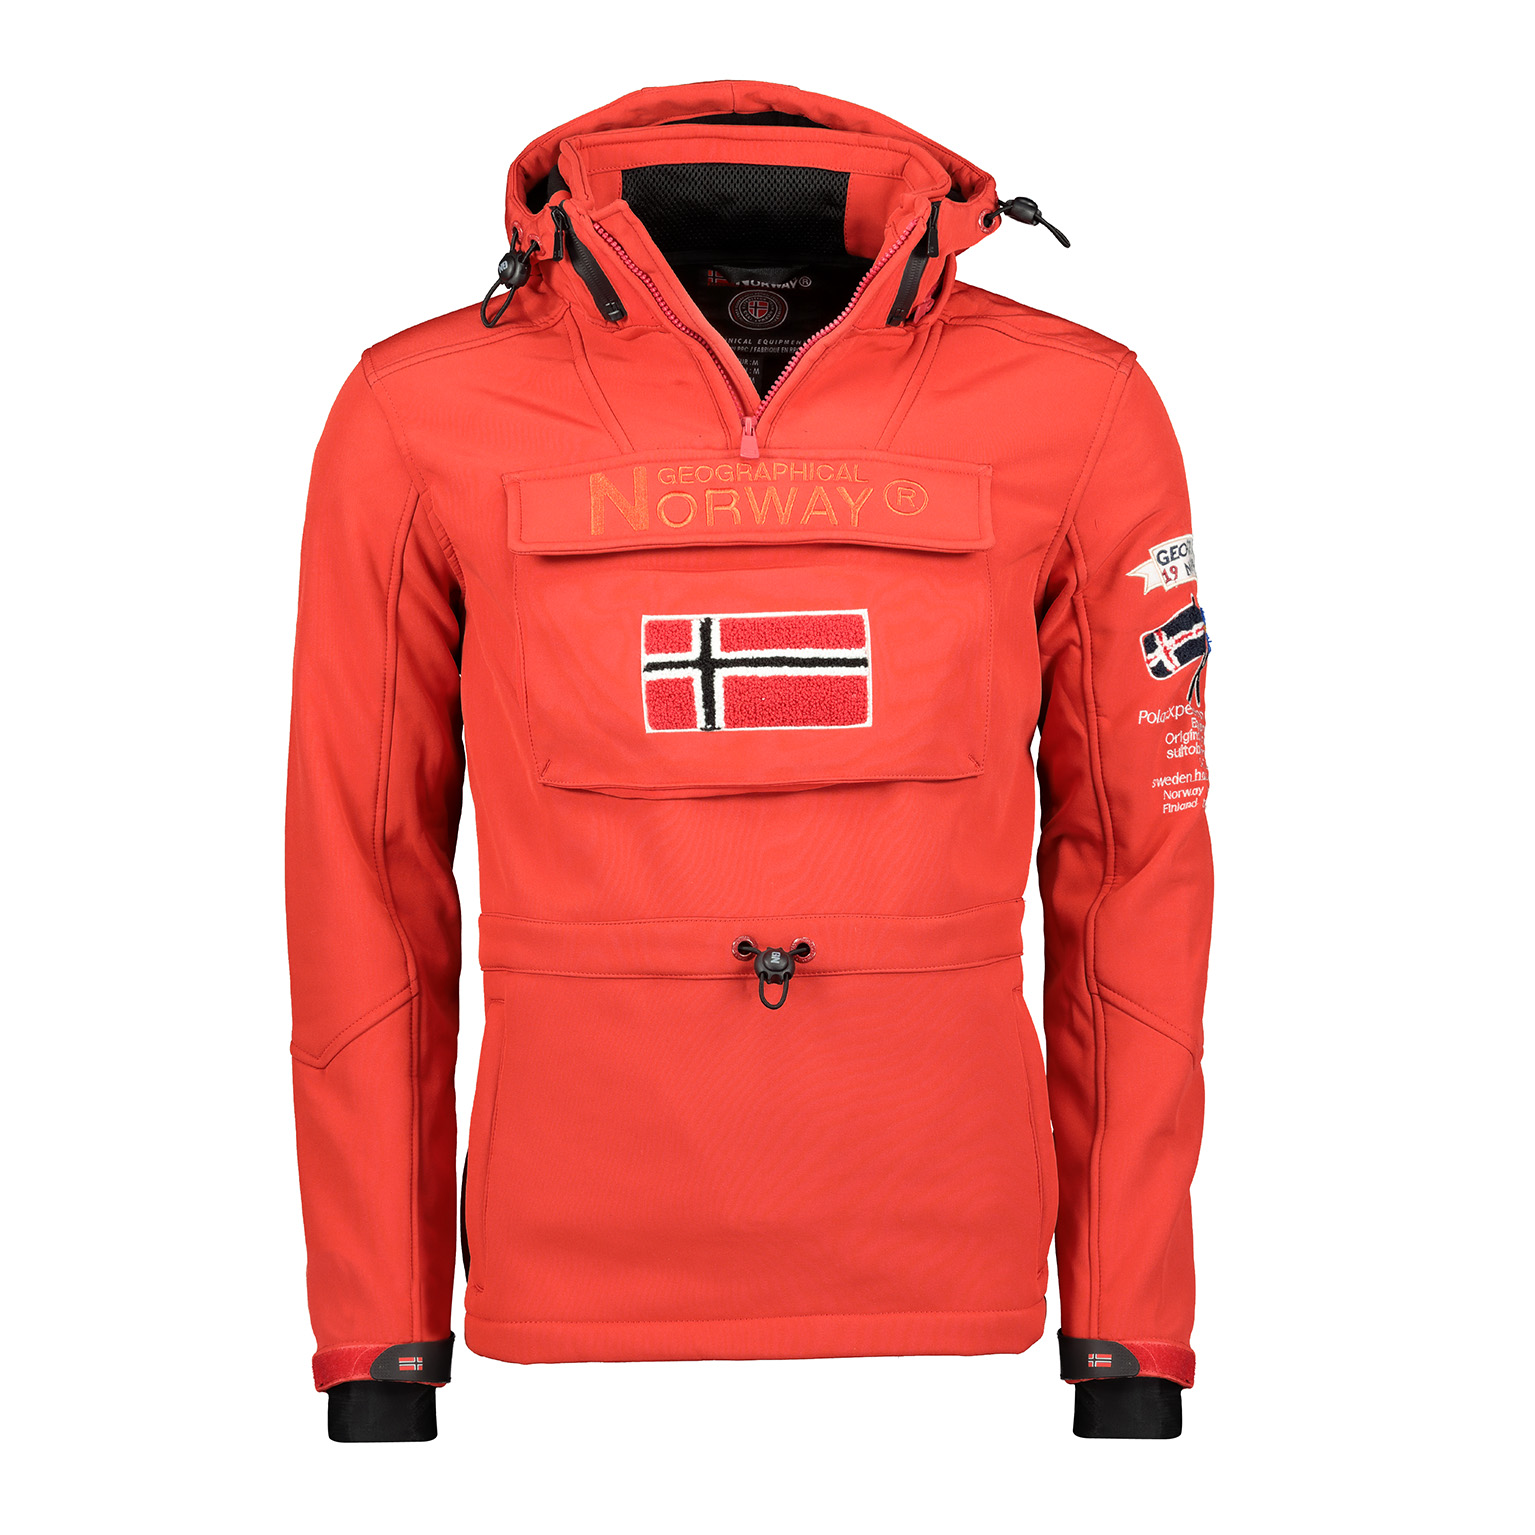 Geographical Norway - Veste homme